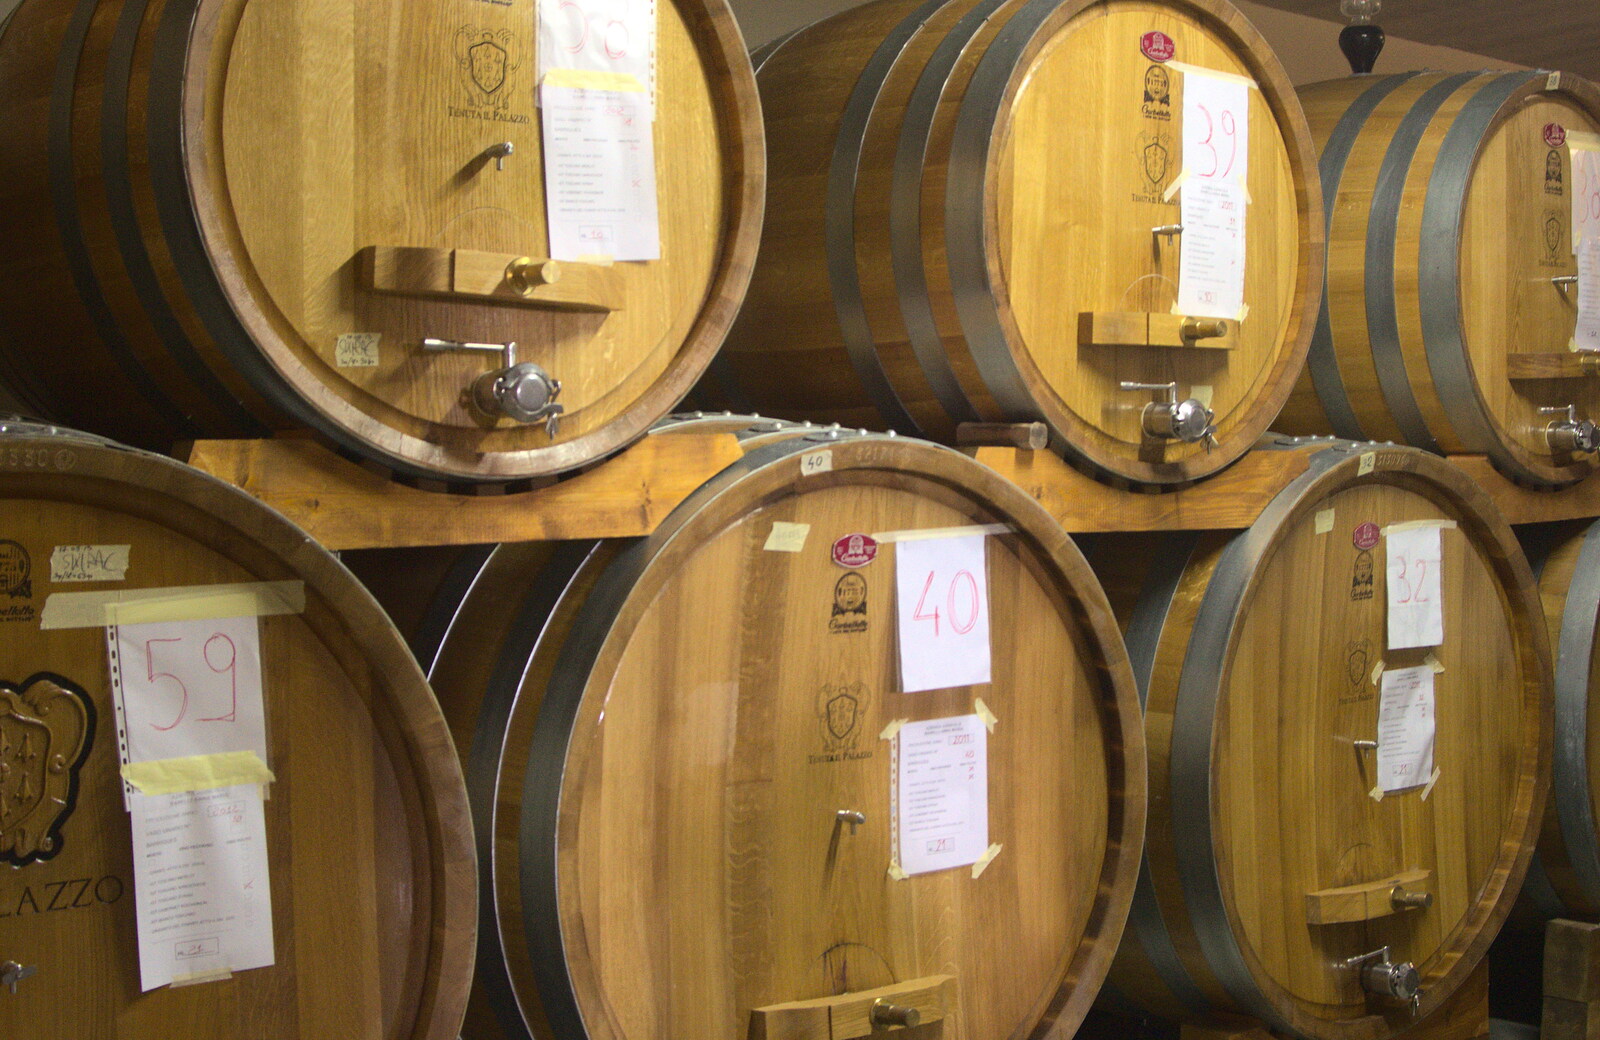 A Tuscan Winery and a Trip to Siena, Tuscany, Italy - 10th June 2013: Brand-new oak barrels